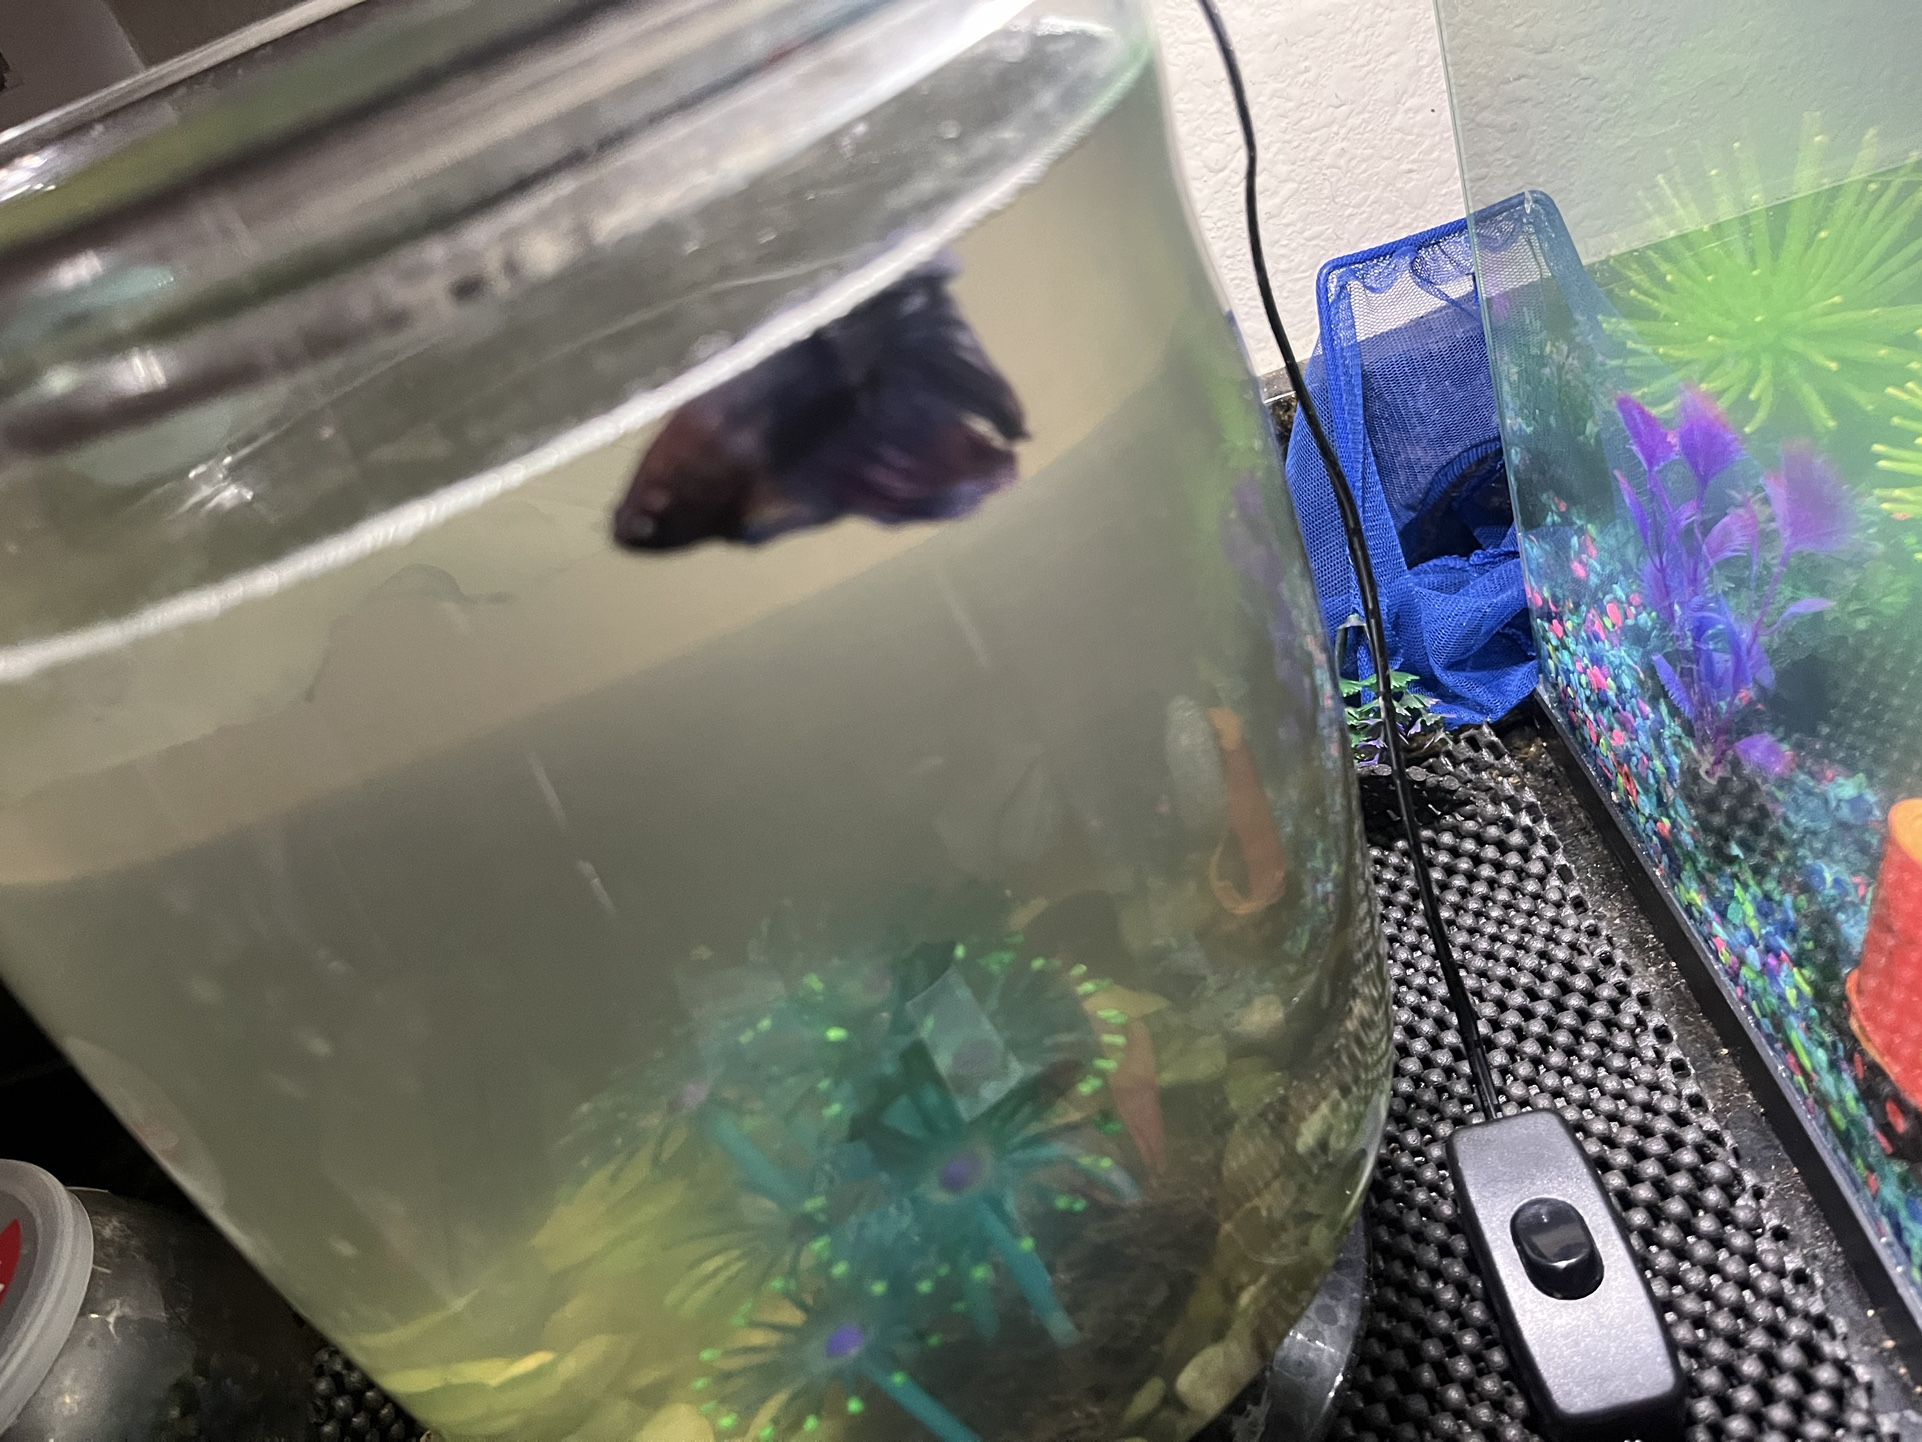 FREE BETTA FISH AND GUPPIES TANK INCLUDED